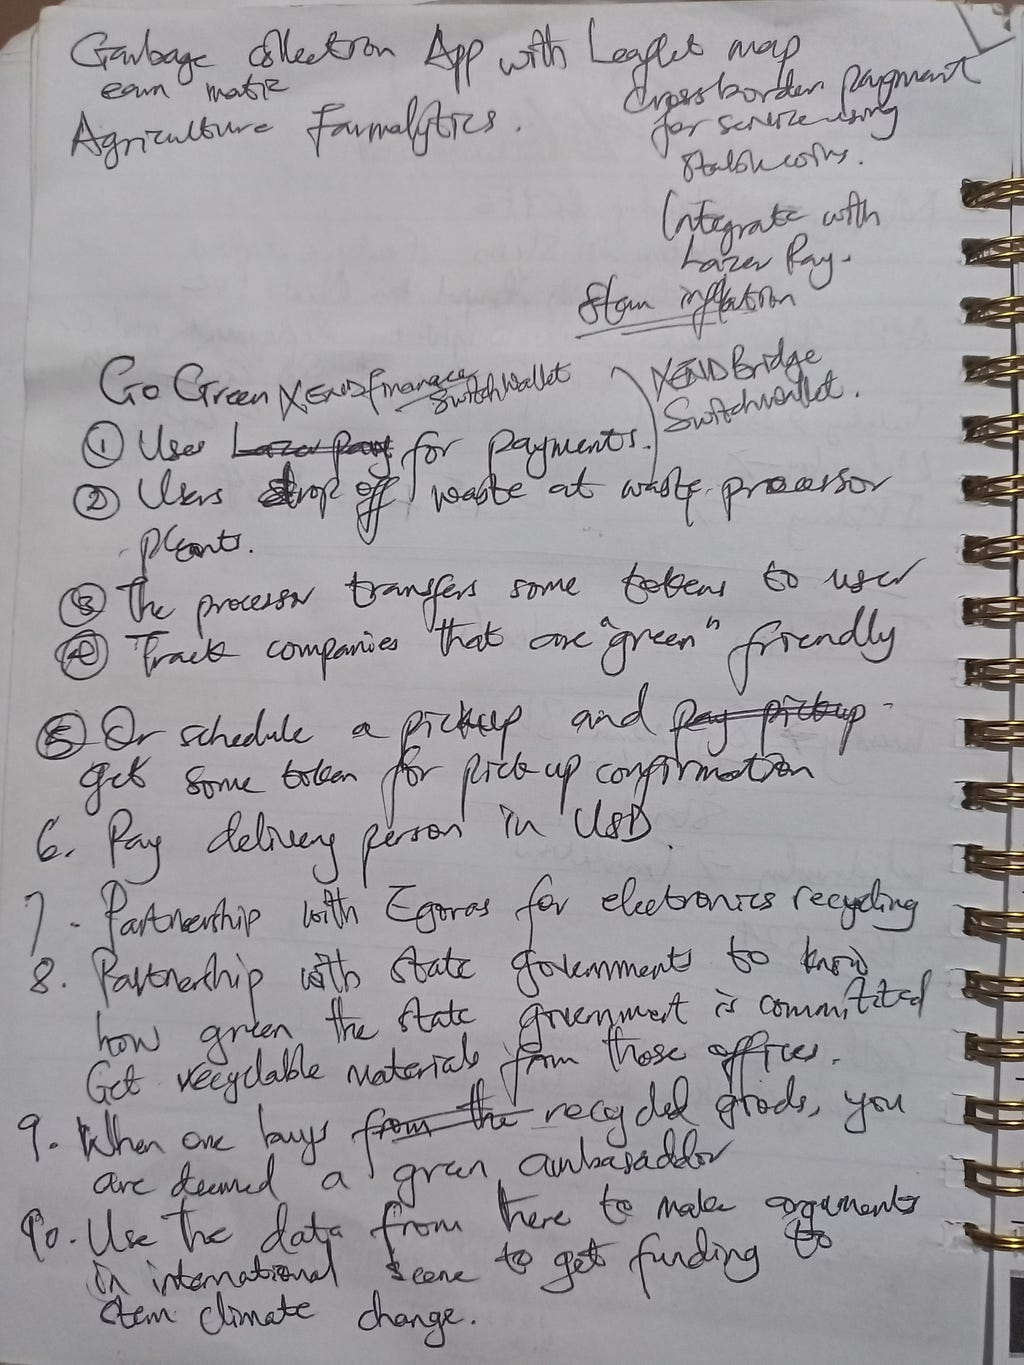 Scribbles on jotter showing a feature wish-list for EcoCycle